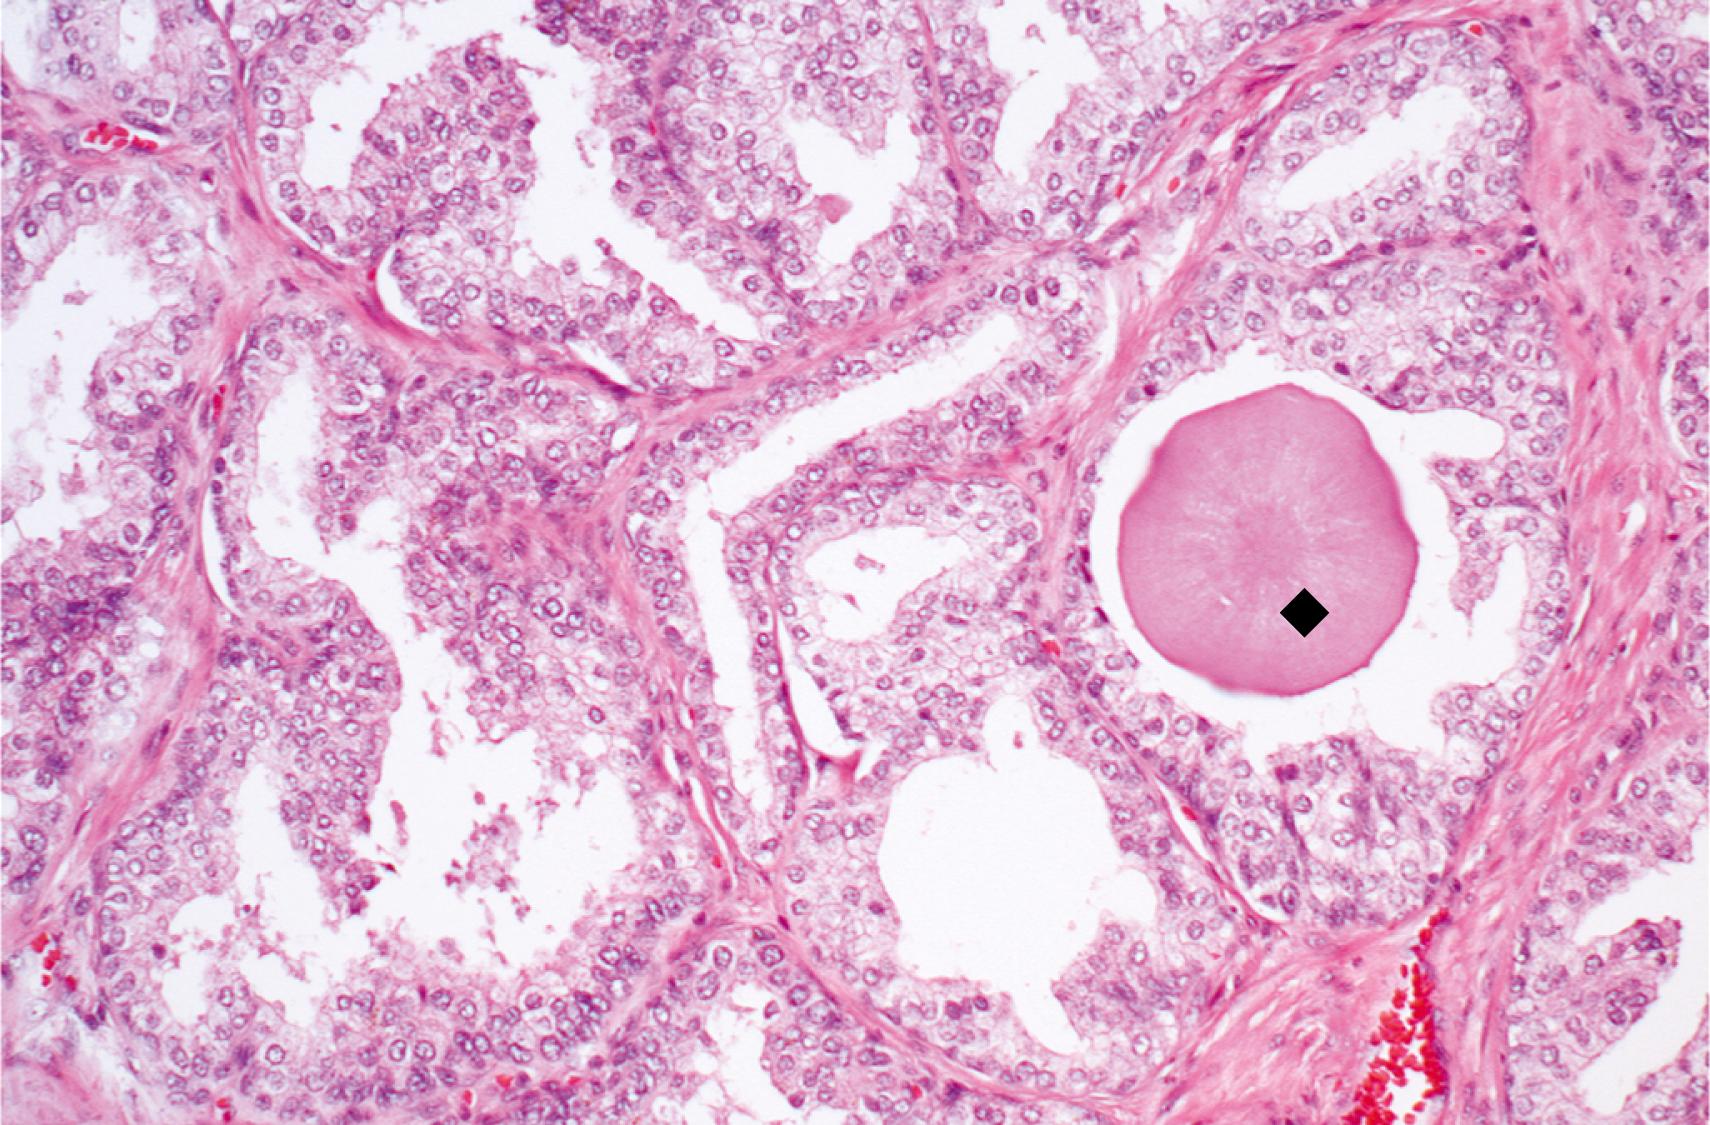 eFIG. 16.3, Benign prostatic hyperplasia with a rounded pink concretion (black diamond) typical of corpora amylacea.